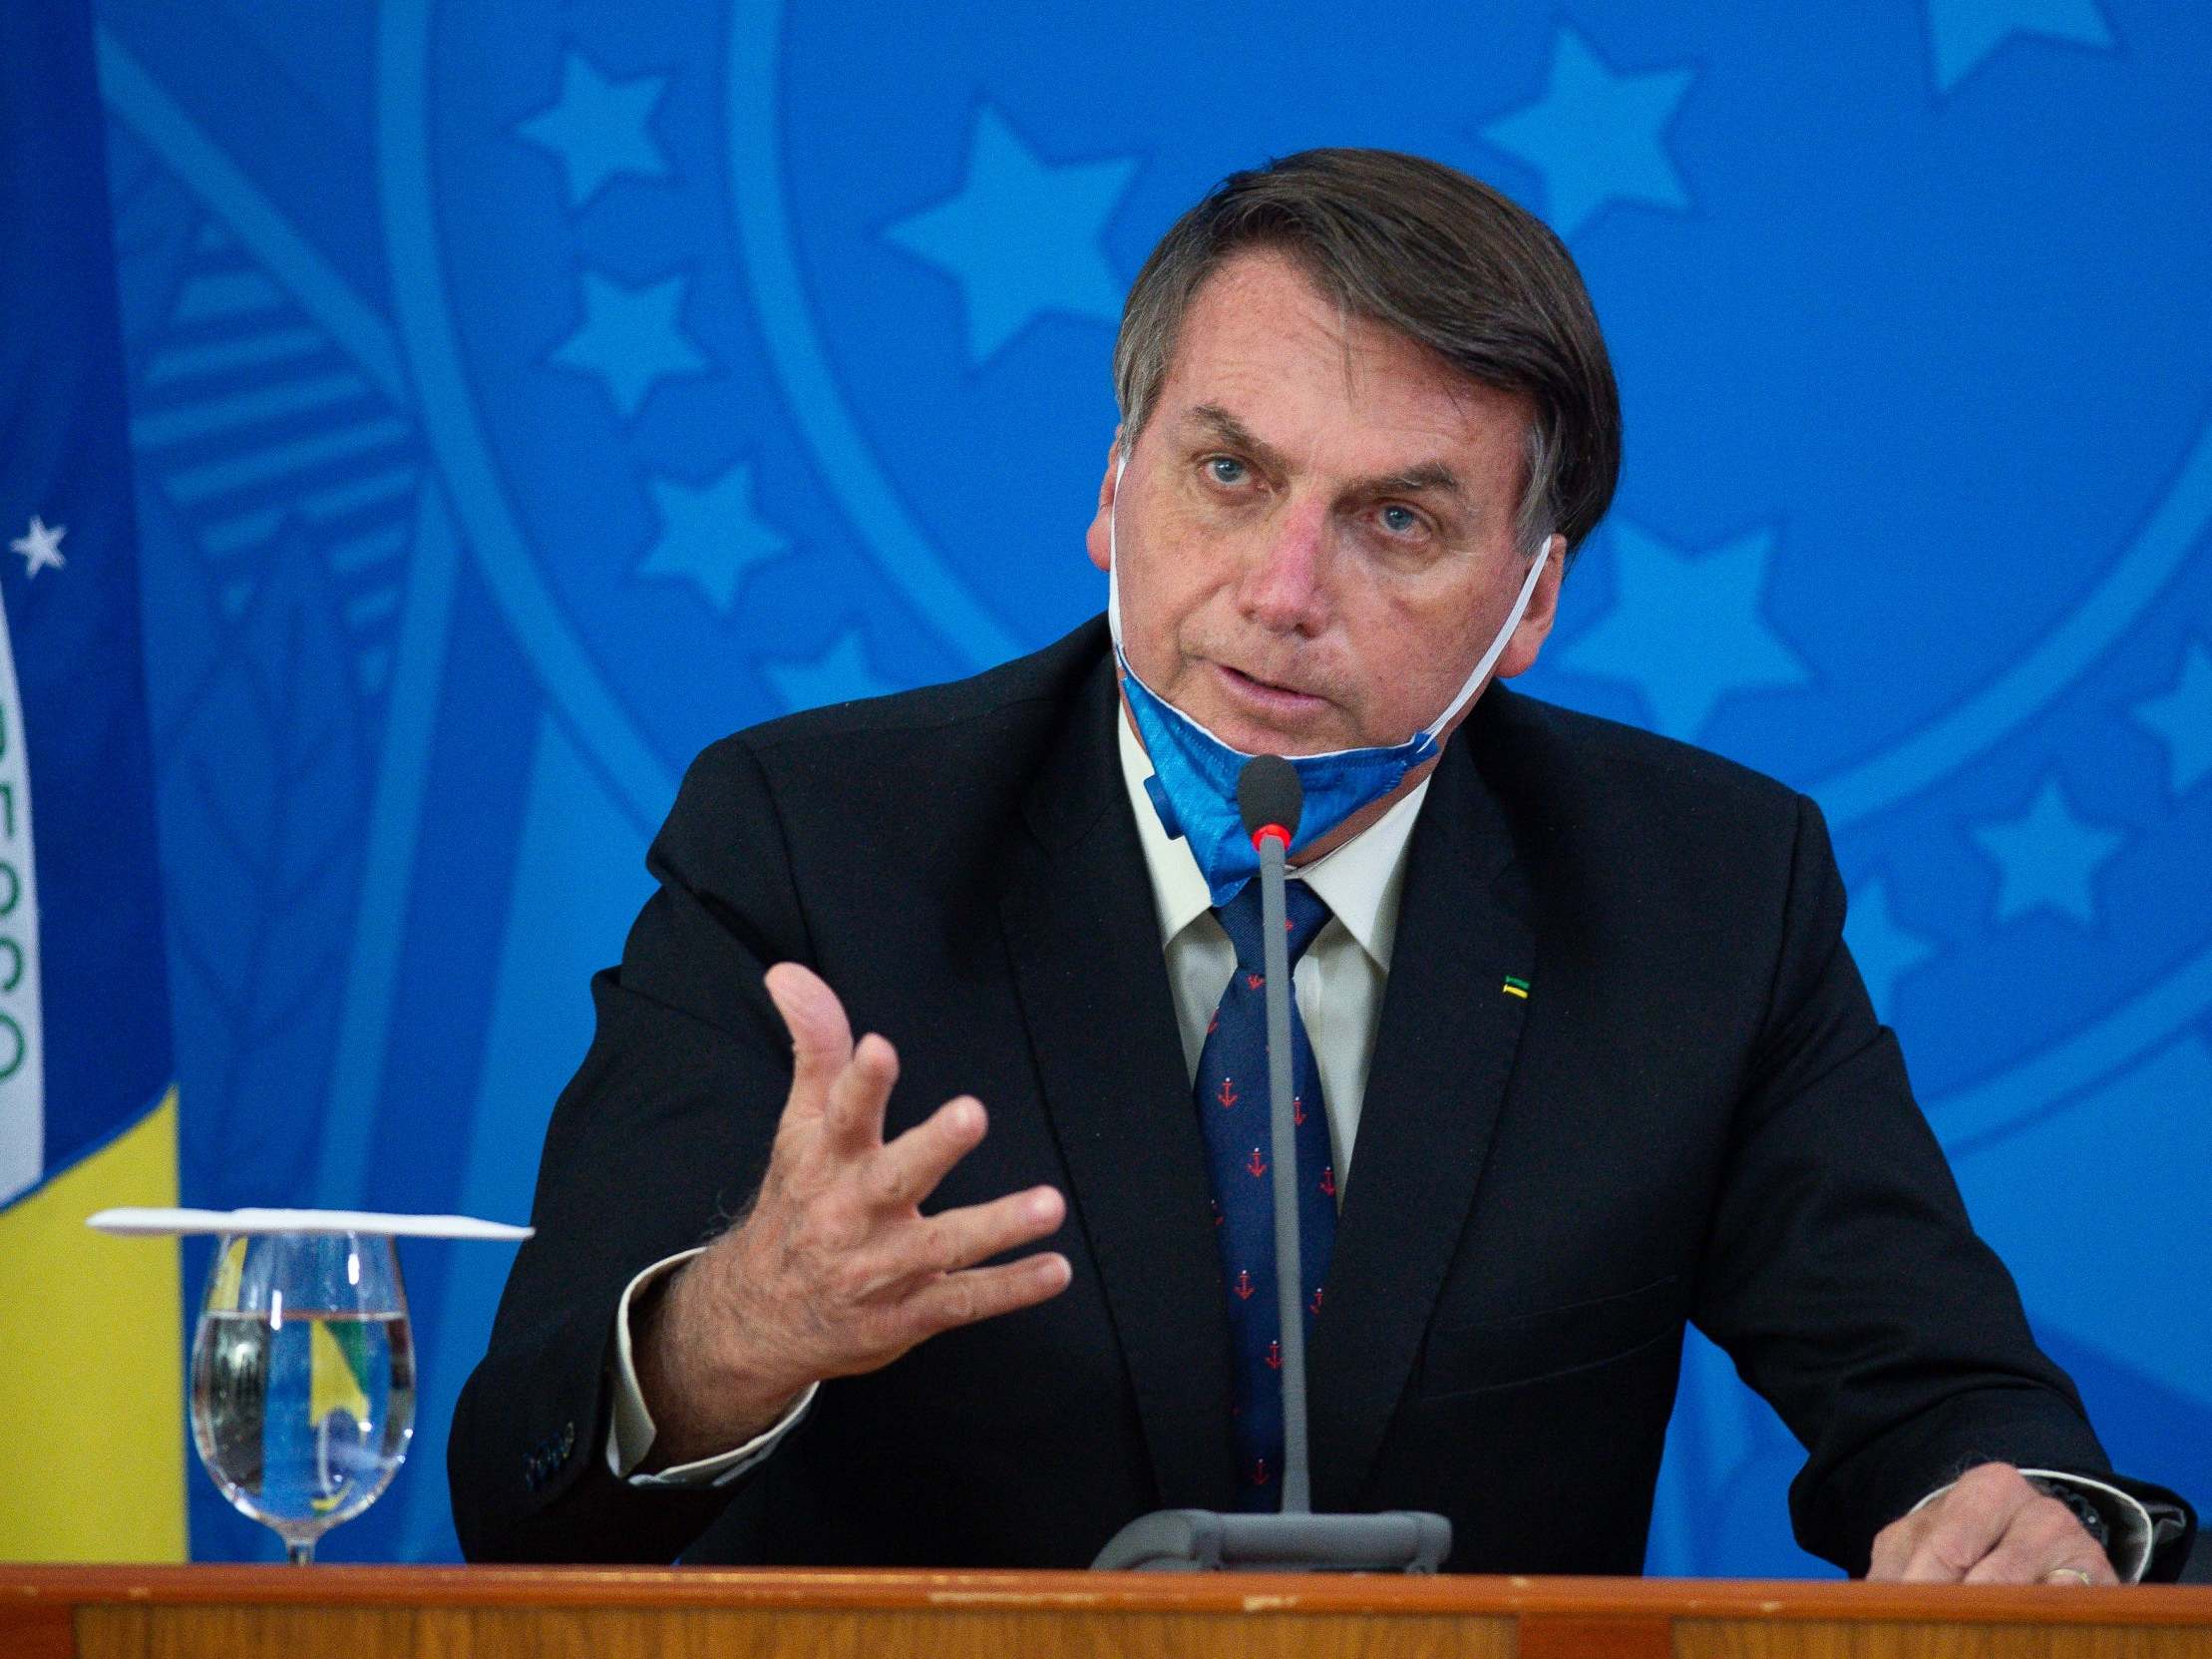 Jair Bolsonaro, president of Brazil, removes his face mask to speak during a press conference about the Covid-19 outbreak at the Planalto Palace, in Brazil, 20 March 2020. ( Andressa Anholete/Getty Images)